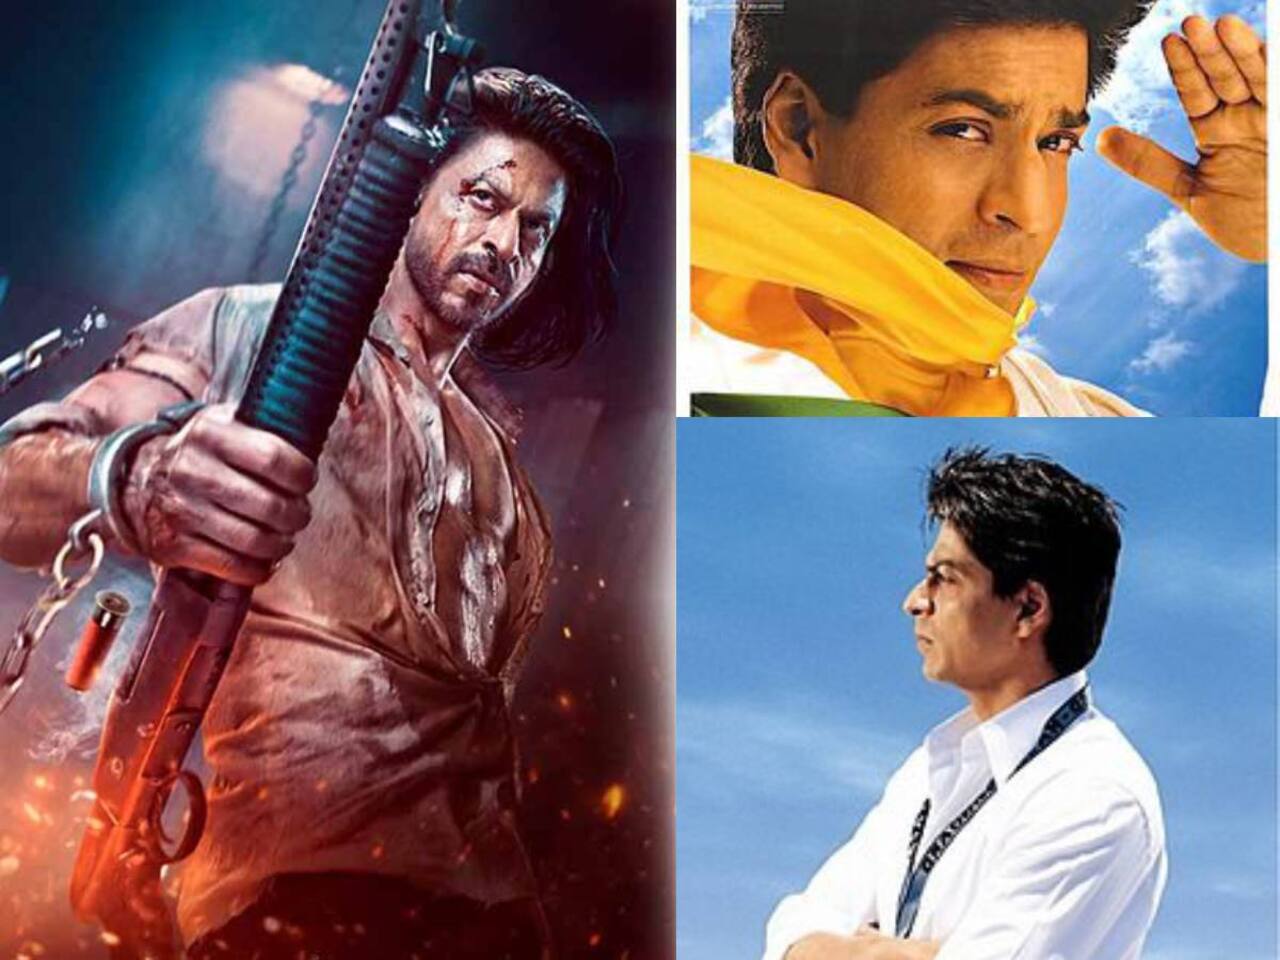 Republic Day 2023: Before Pathaan, Shah Rukh Khan stole fans hearts with these patriotic films